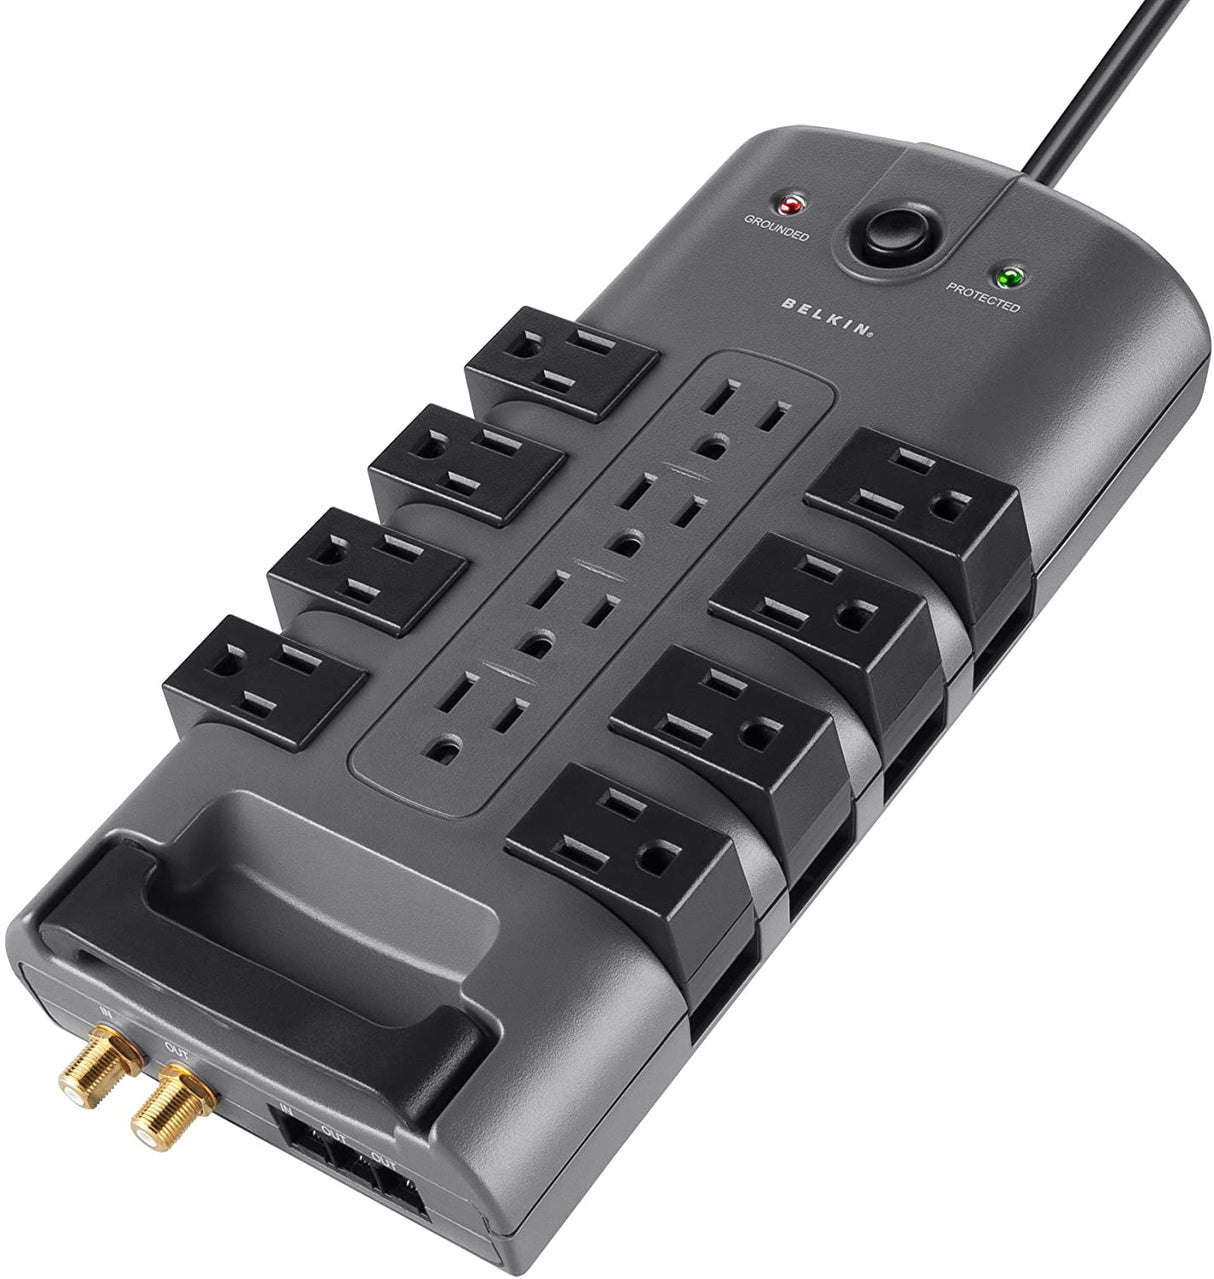 Belkin Surge Power Strip Protector - 8 Rotating &amp; 4 Stationary AC Multiple Outlets - 8 ft Long Heavy Duty Extension Cord Flat Pivot Plug for Home, Office, Travel, Desktop &amp; Charging Brick, 4320 Joules Phone Protection Power Strip 12-Outlet